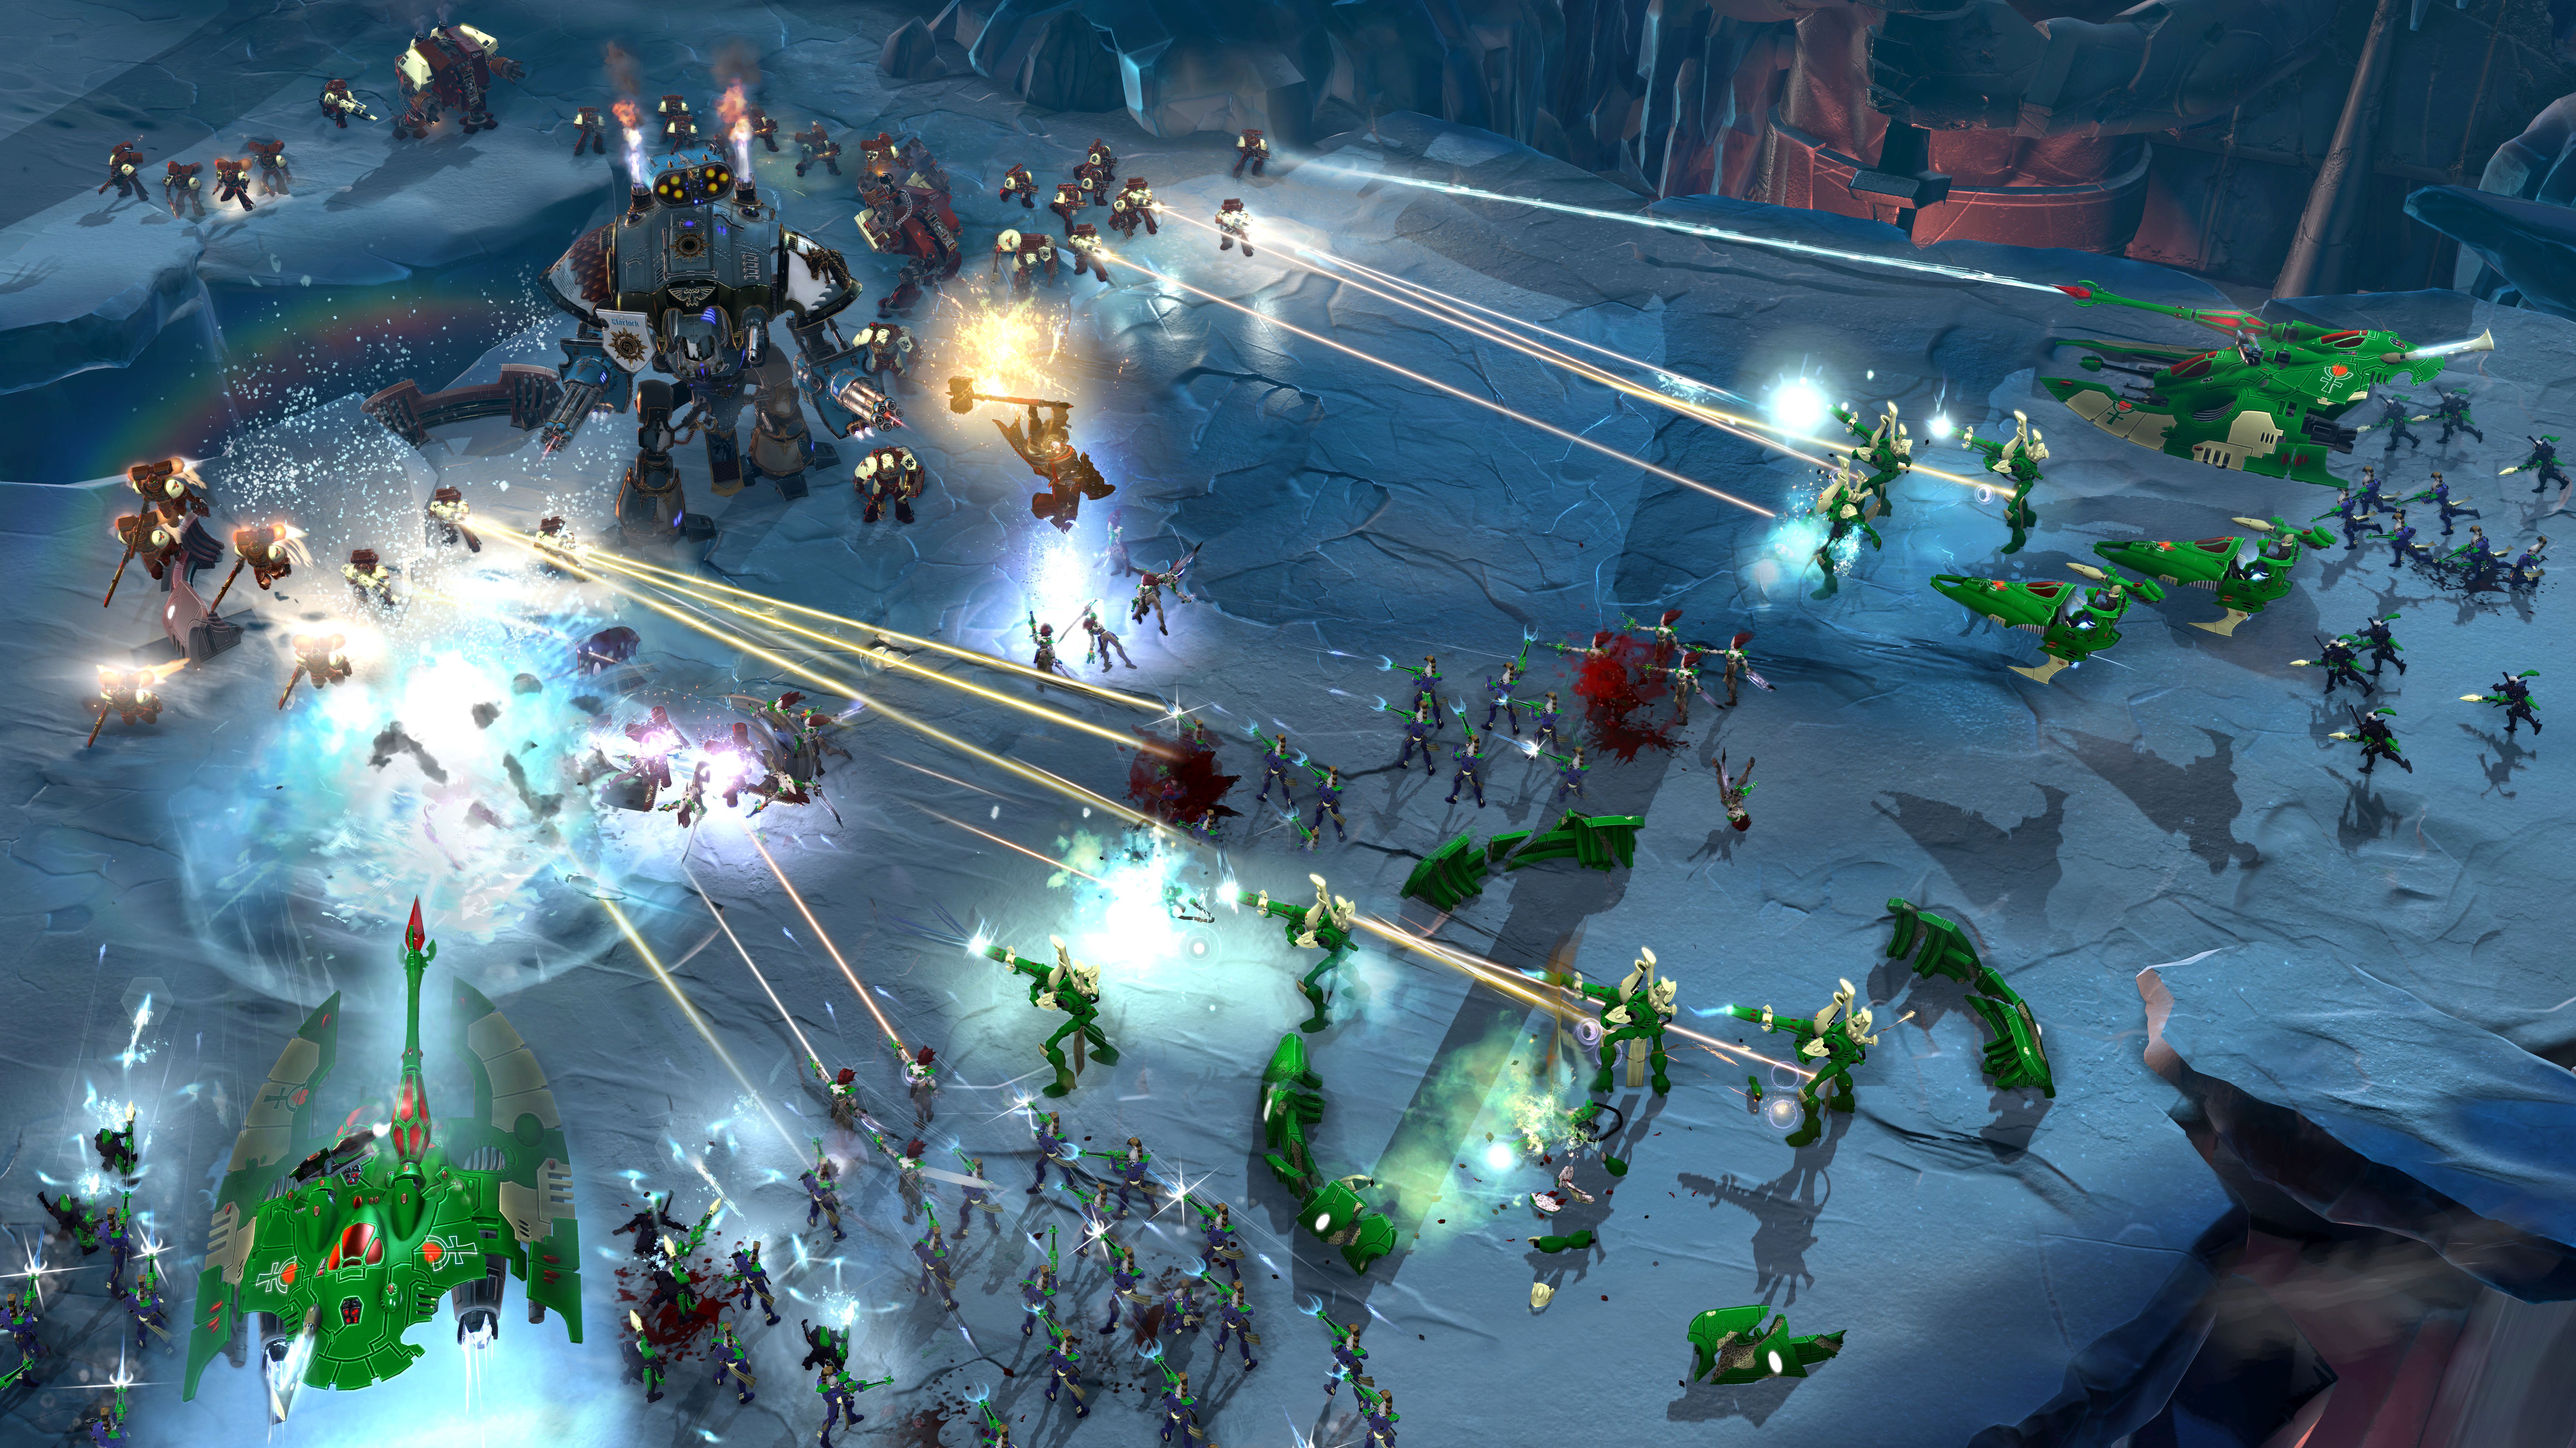 dawn of war 3 should have been like company of heroes